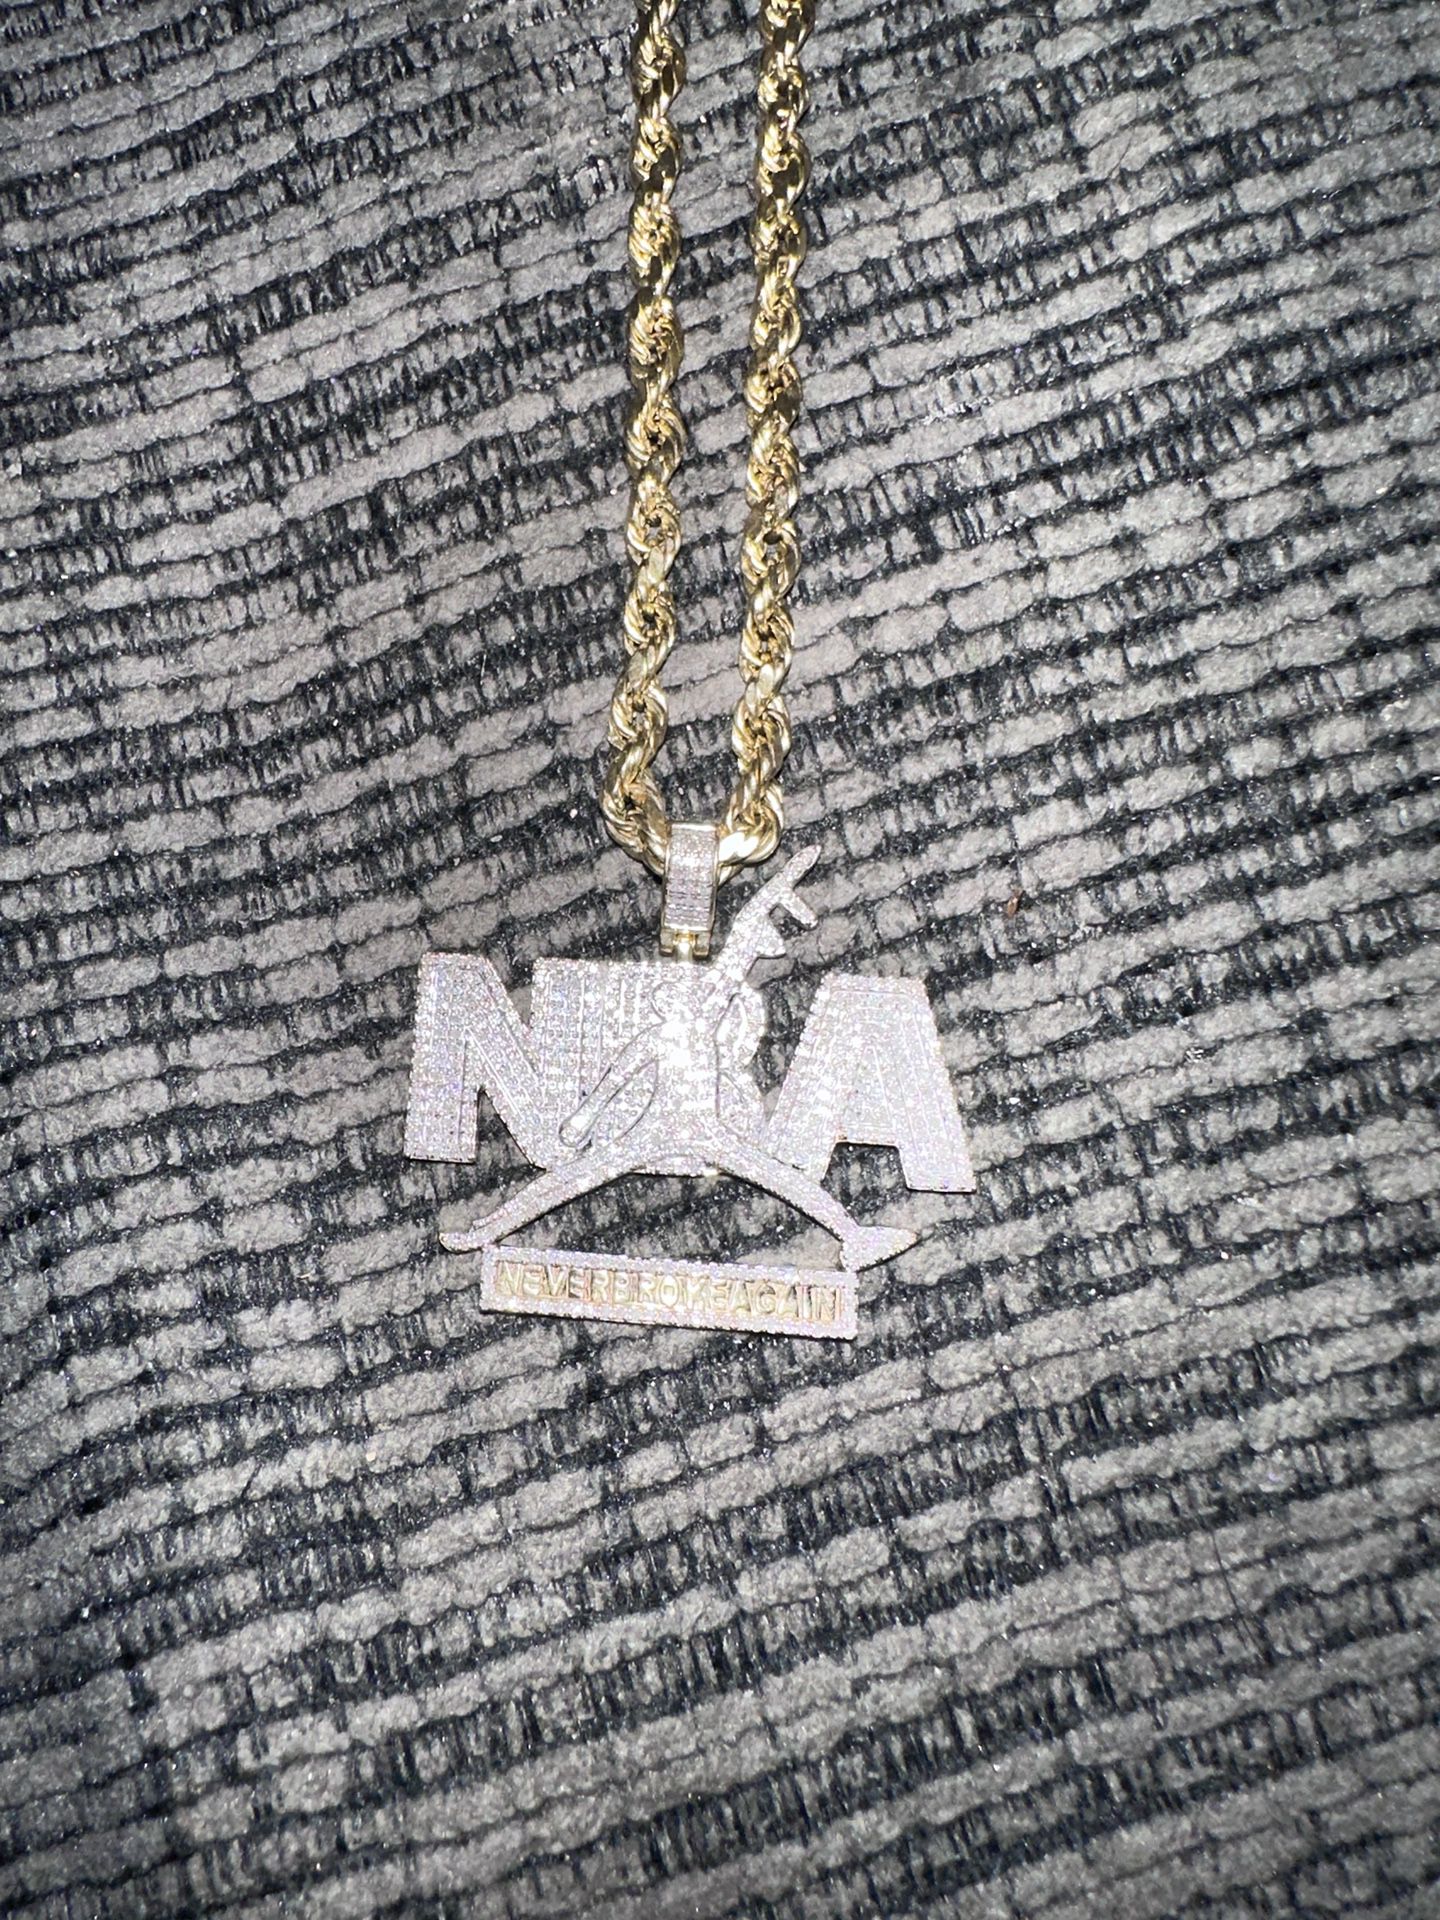 Gold Chain With Nba Pendant for Sale in Thornton, CO - OfferUp